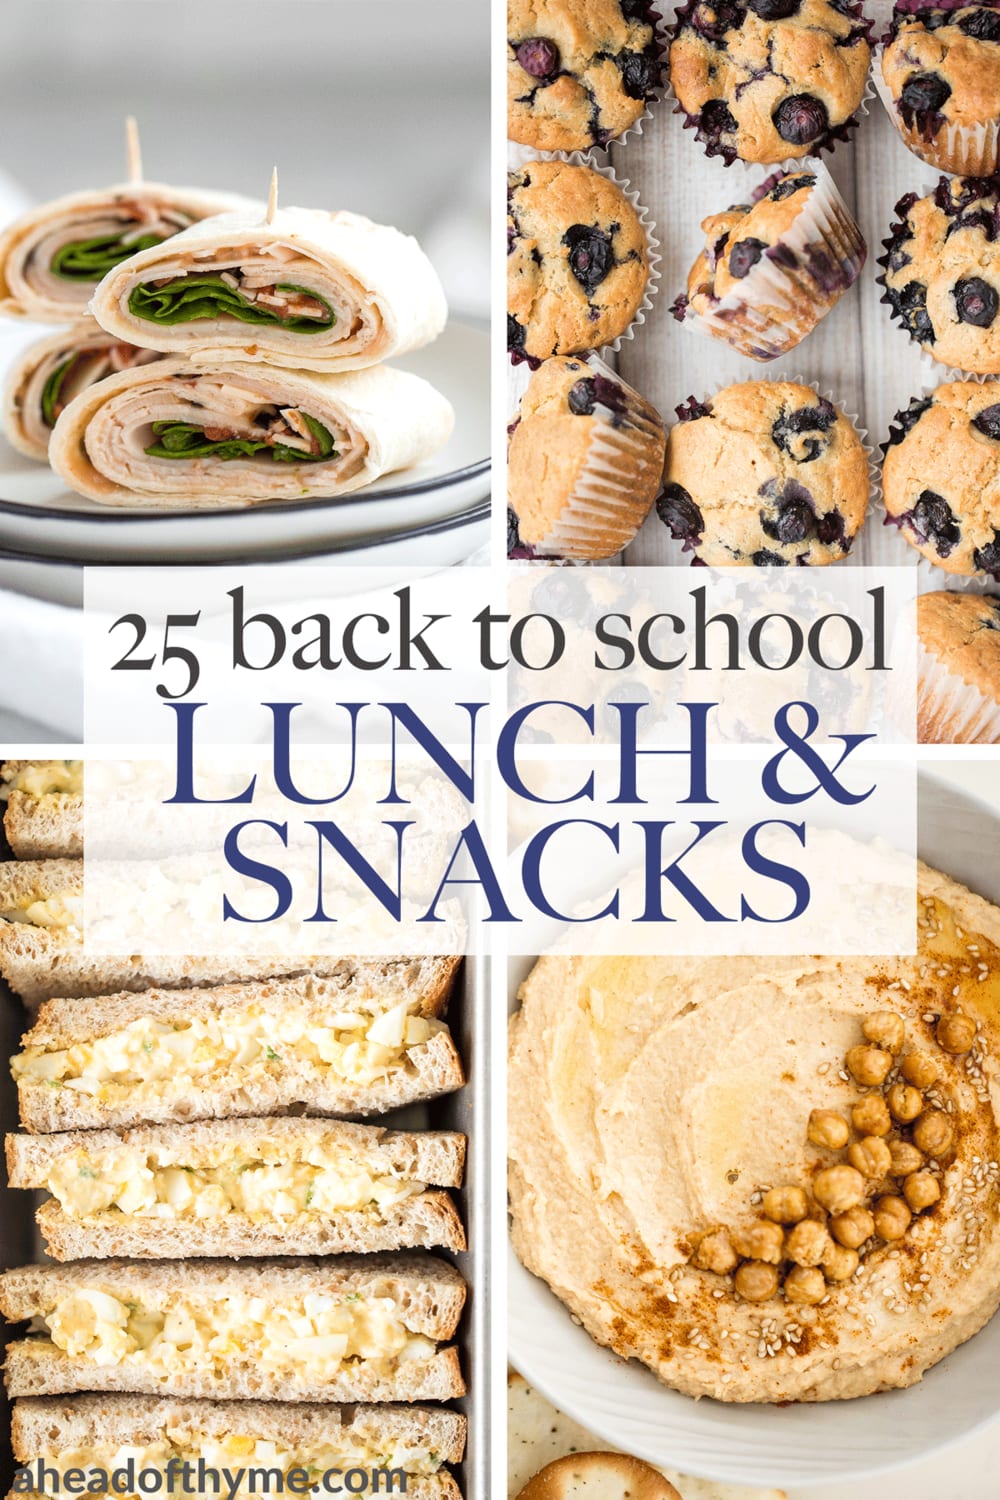 25 Back to School Lunch and Snack Ideas